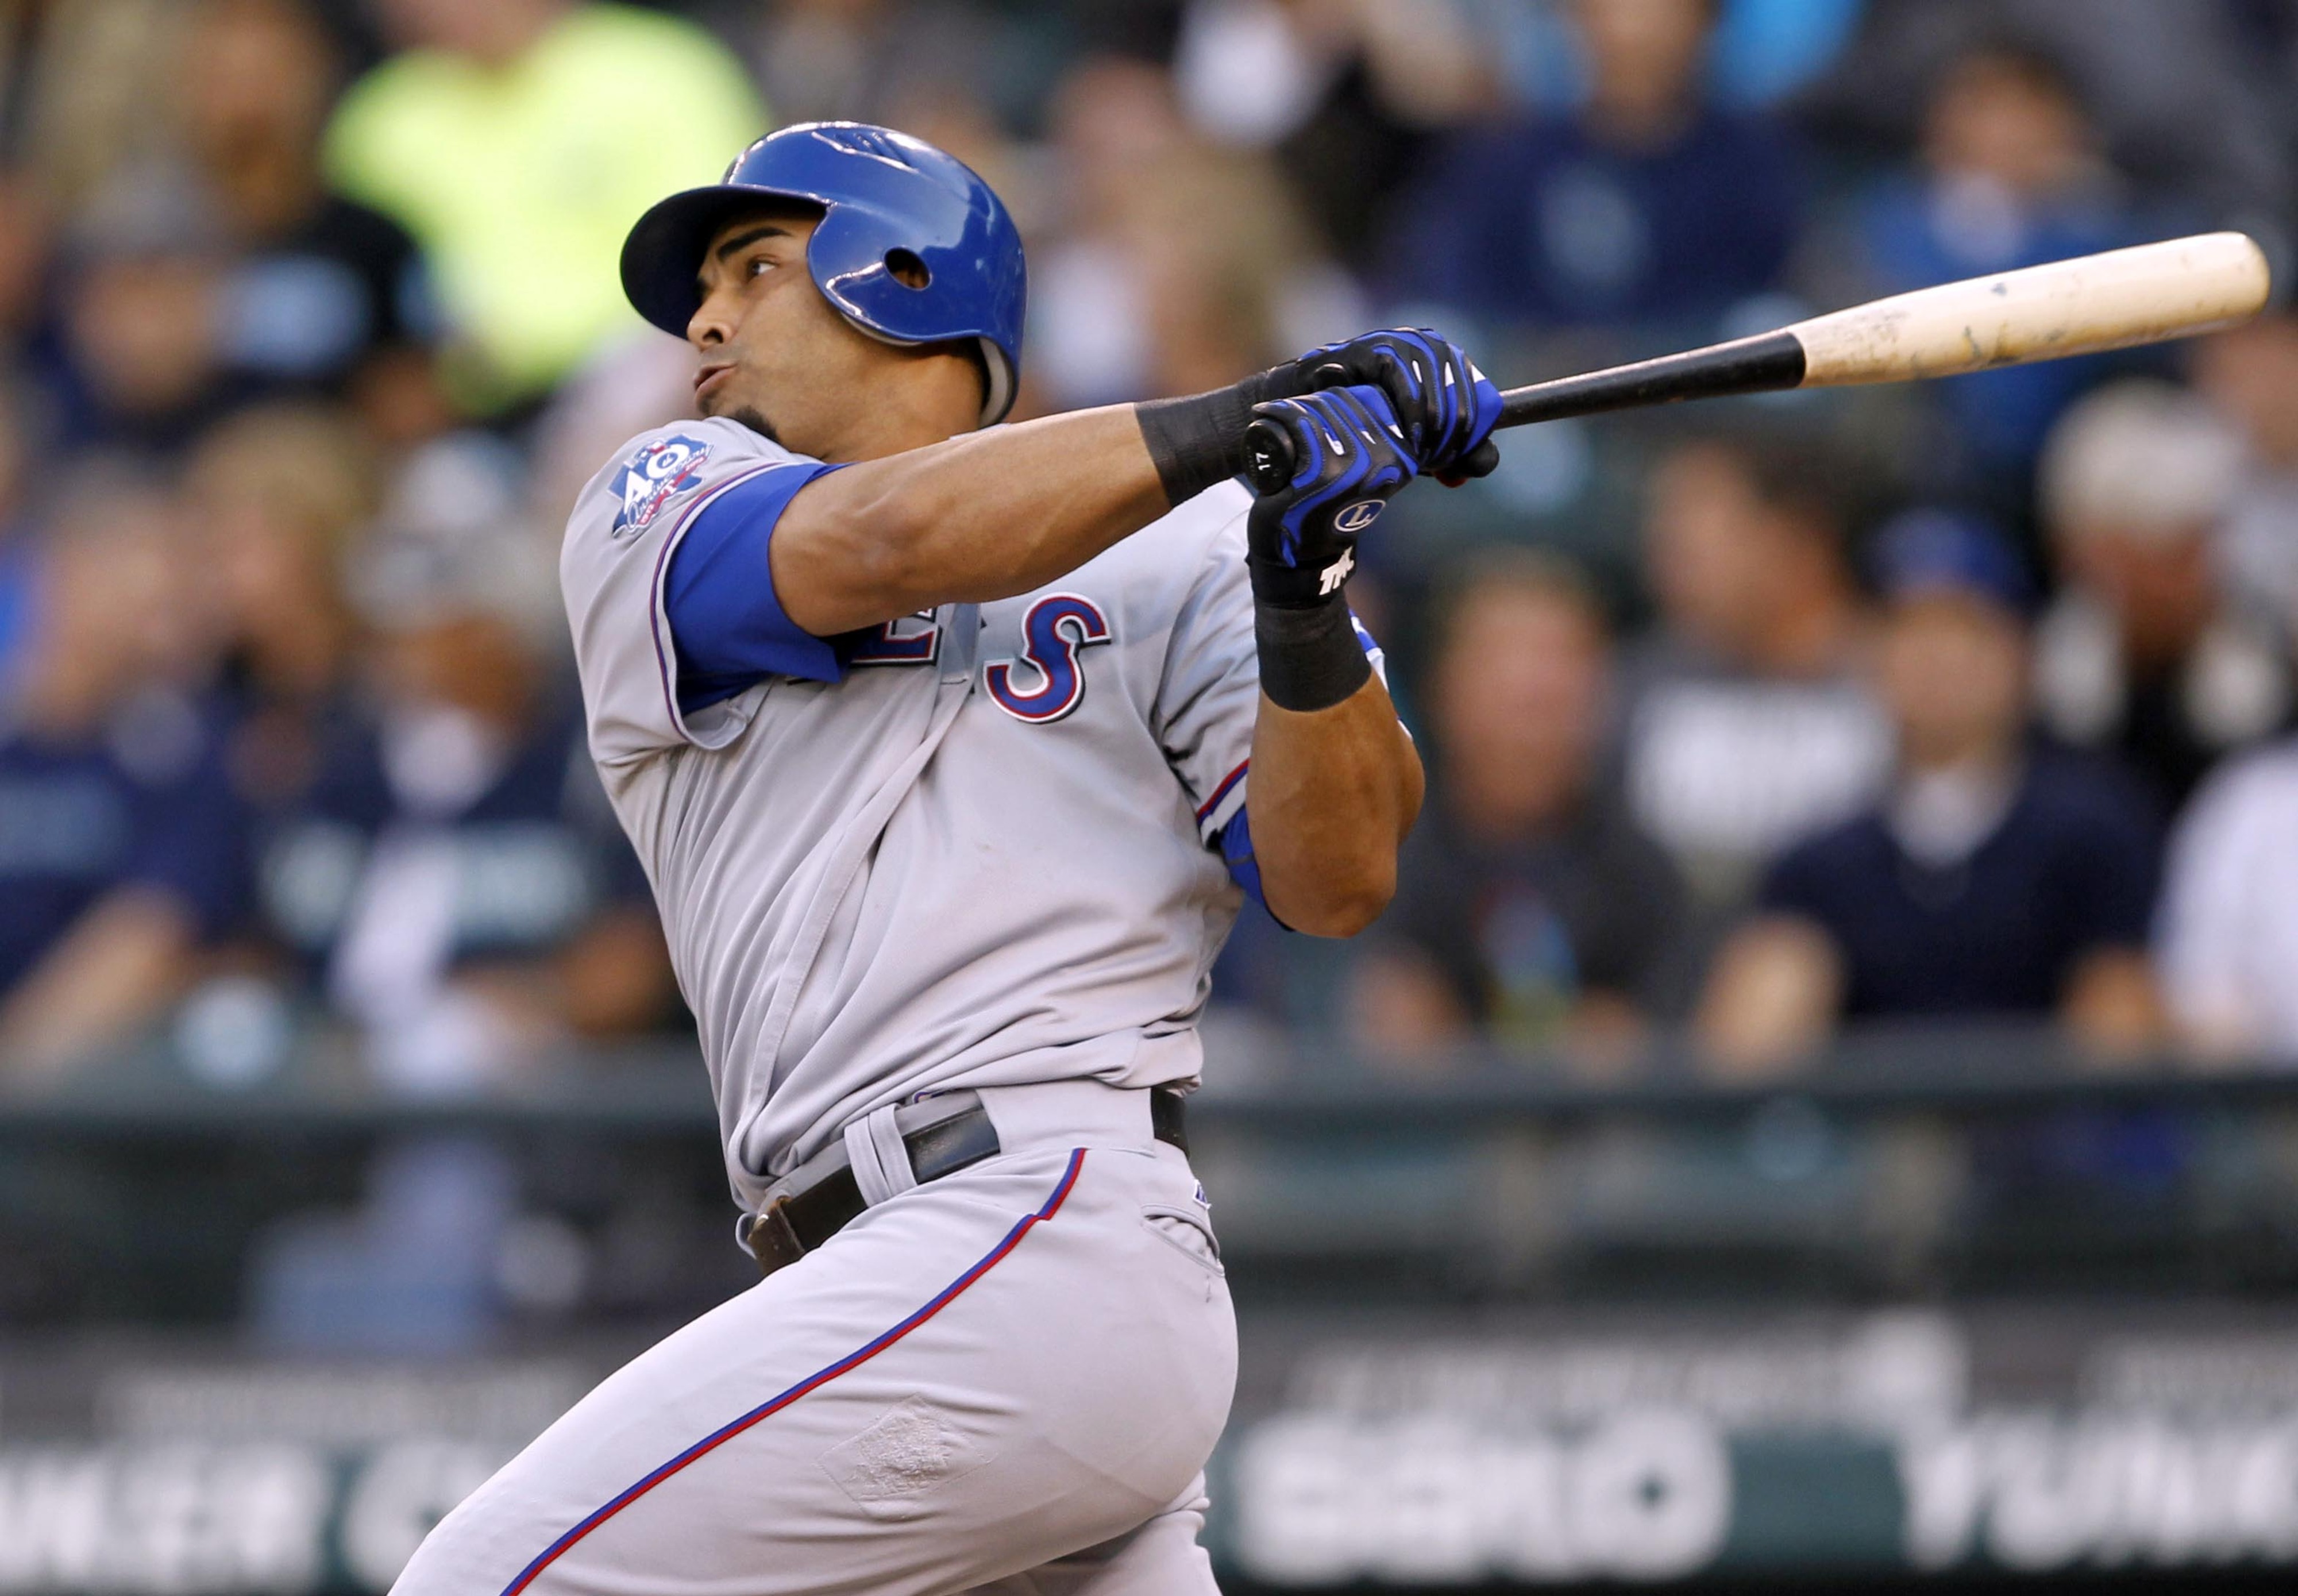 Sept 22, 2012; Seattle, WA, USA; Texas Rangers right fielder Nelson Cruz doubles against the Seattle Mariners during the second inning at Safeco Field. Mandatory Credit: Joe Nicholson-US PRESSWIRE